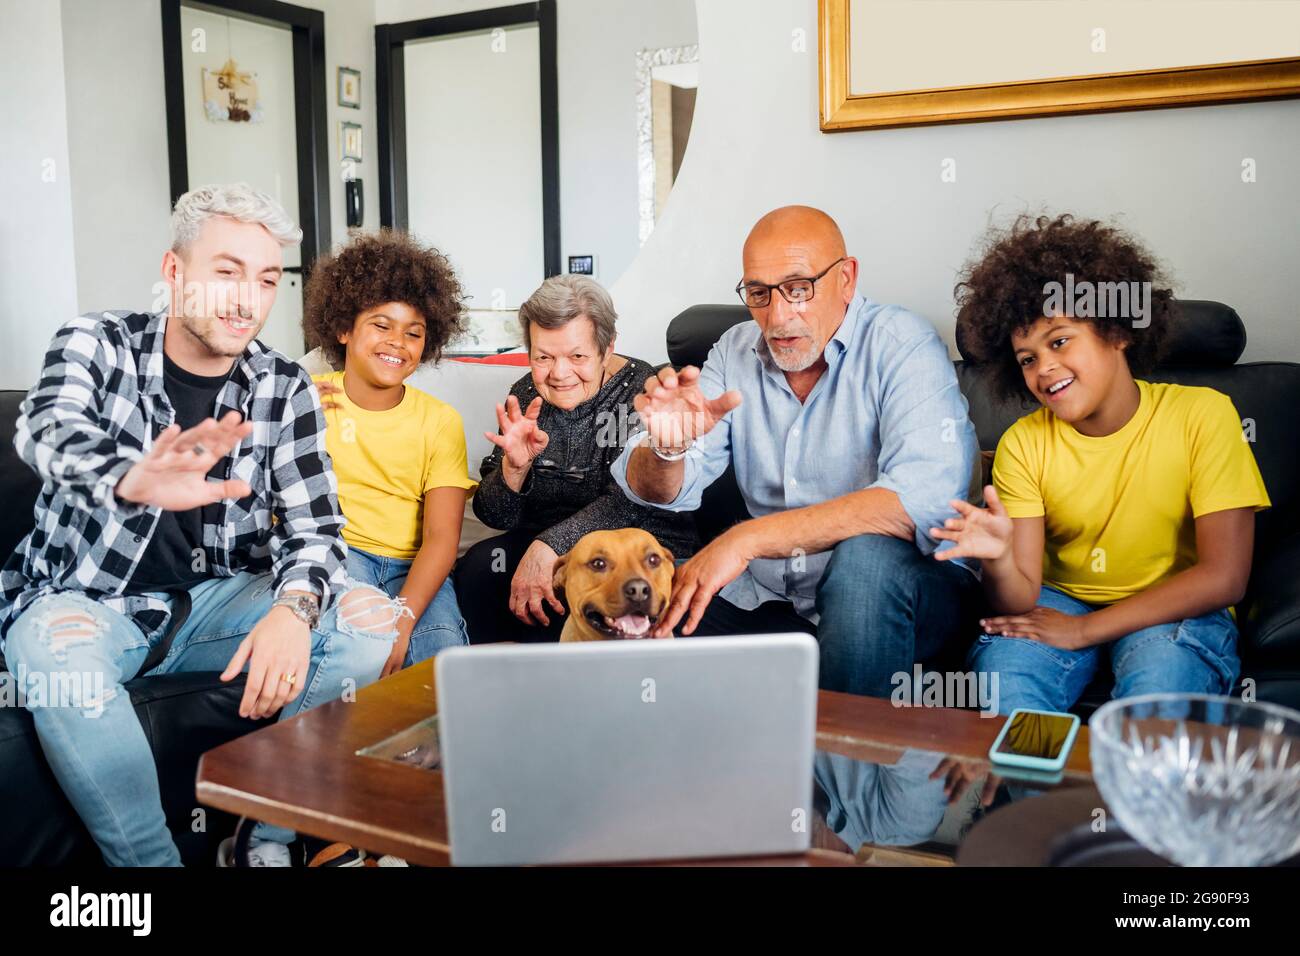 Multi-ethnic family greeting during video call on laptop at home Stock Photo